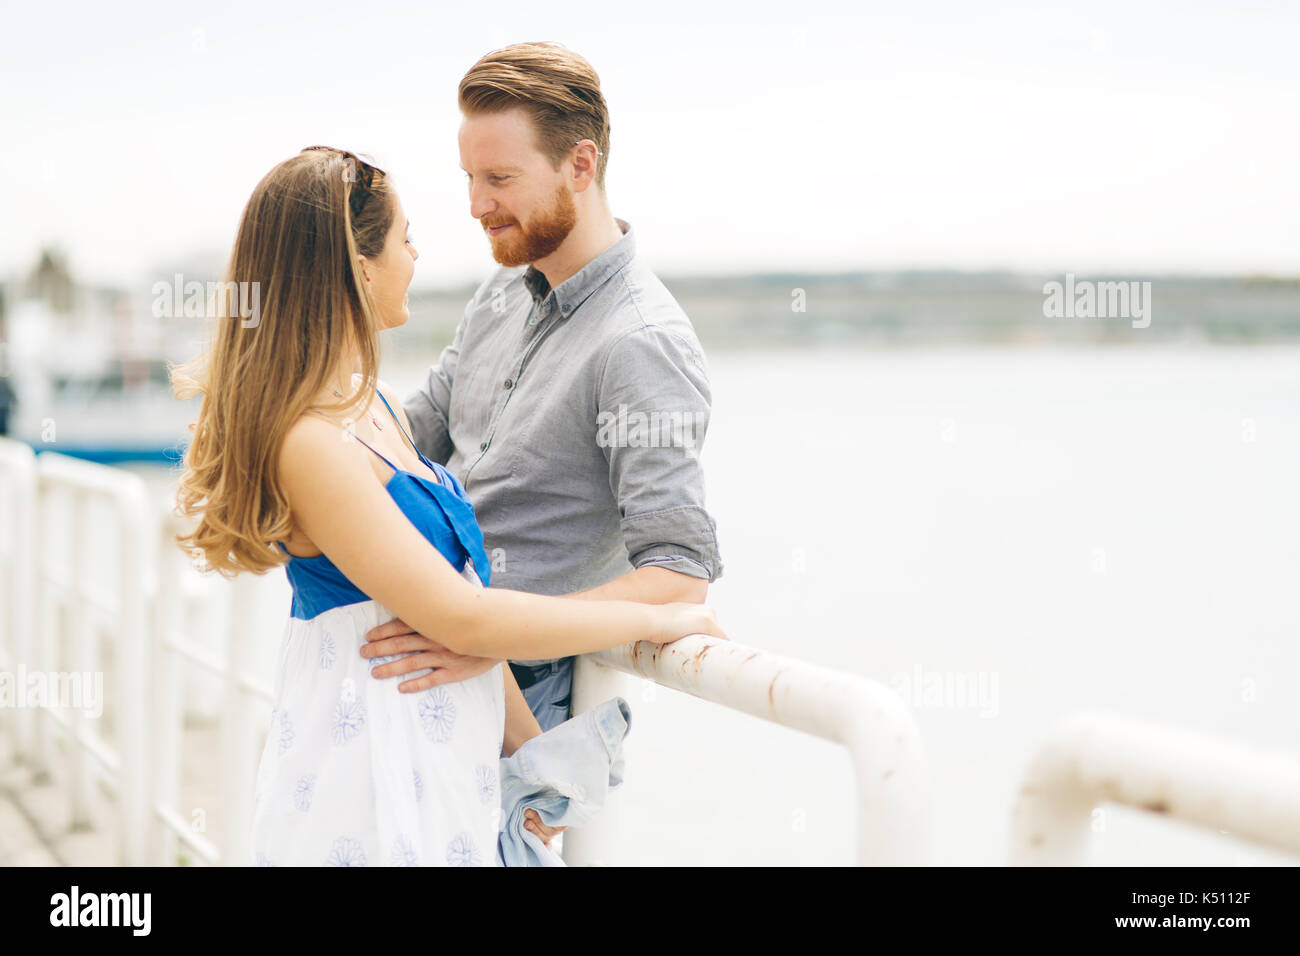 Couple spending time together Stock Photo